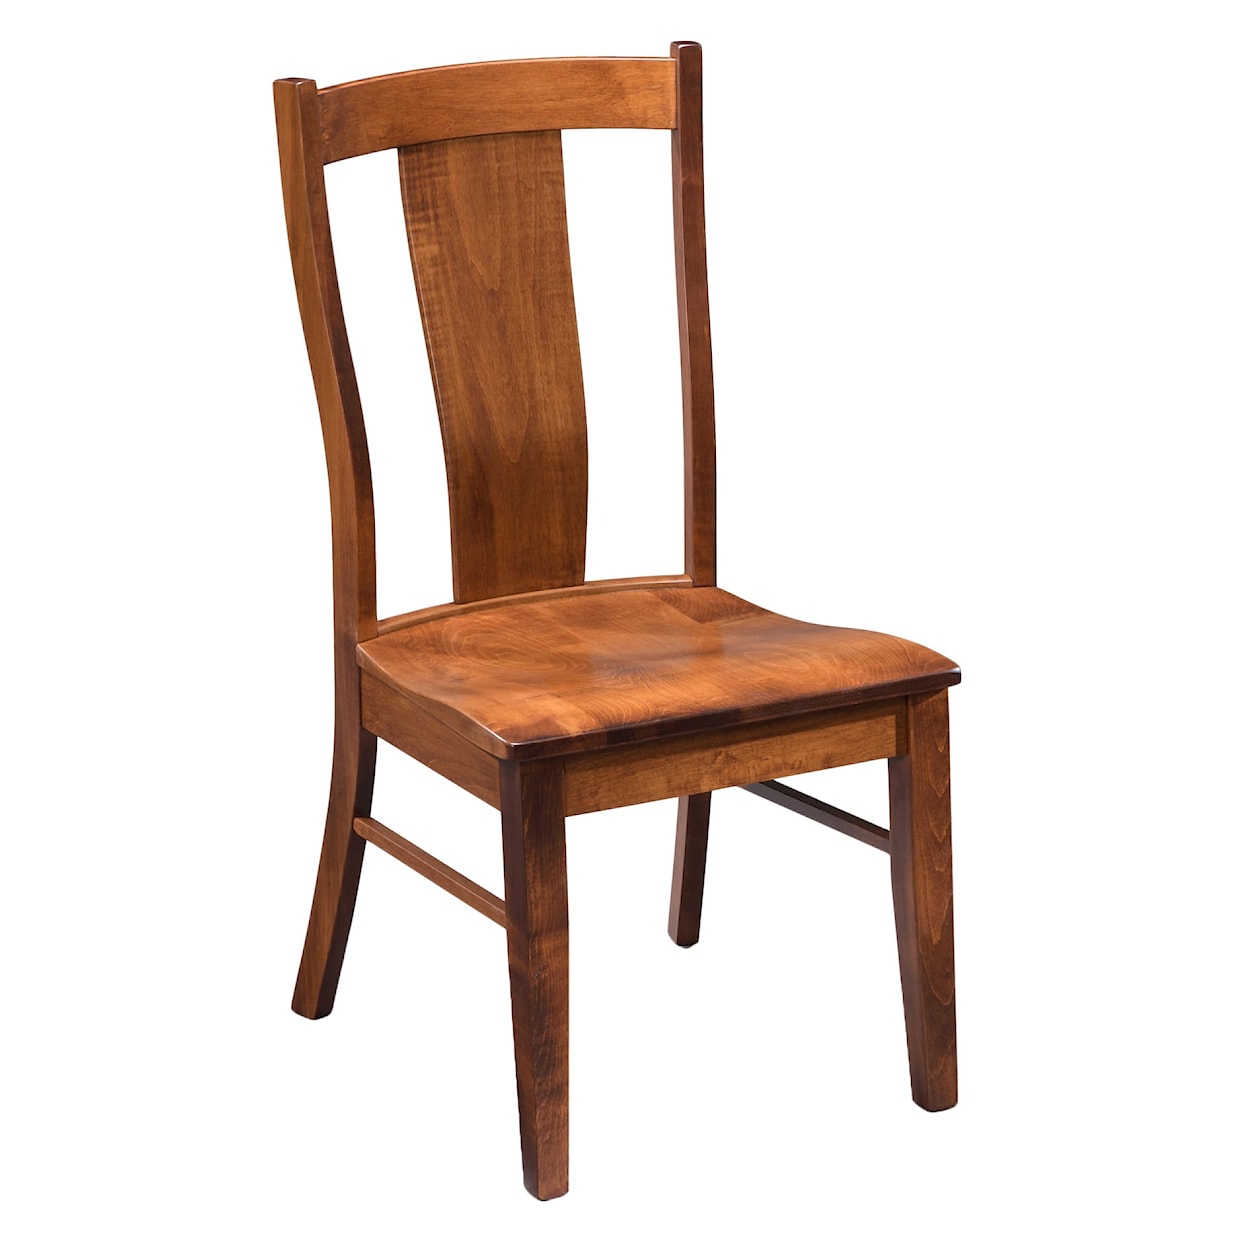 Archbold Furniture Amish Essentials Casual Dining Lucas Chair